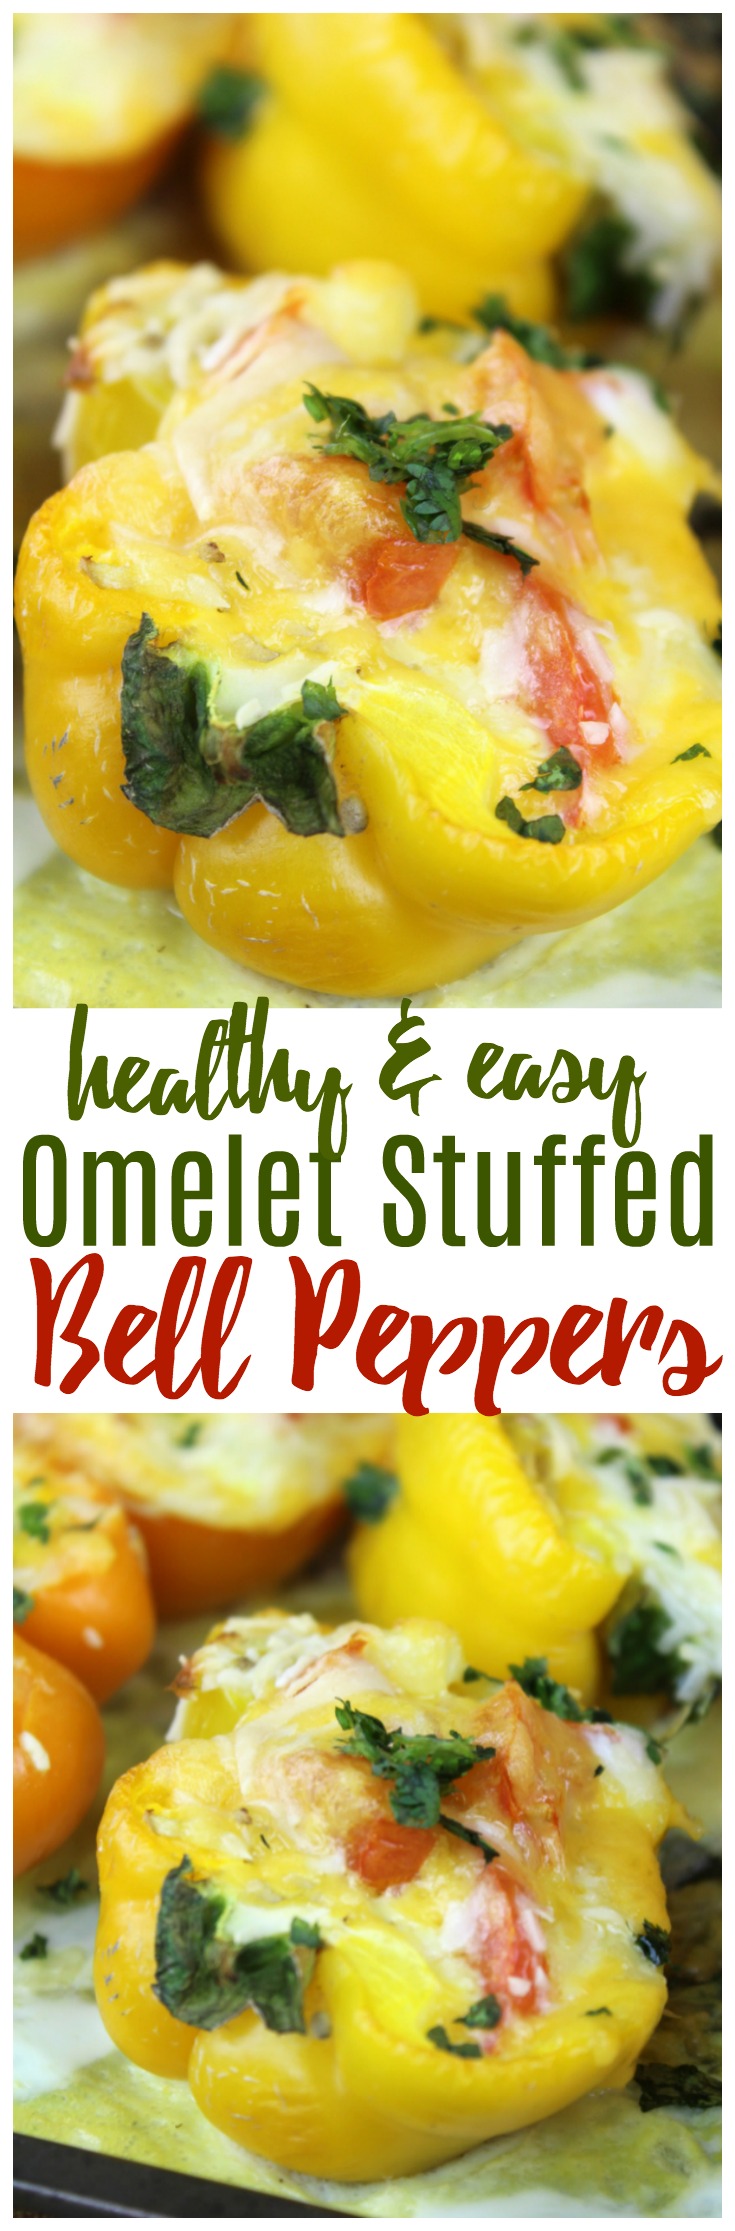 Omelet stuffed bell peppers are the perfect easy, healthy dinner idea! Not only are they easy to make, they are incredibly healthy, too!